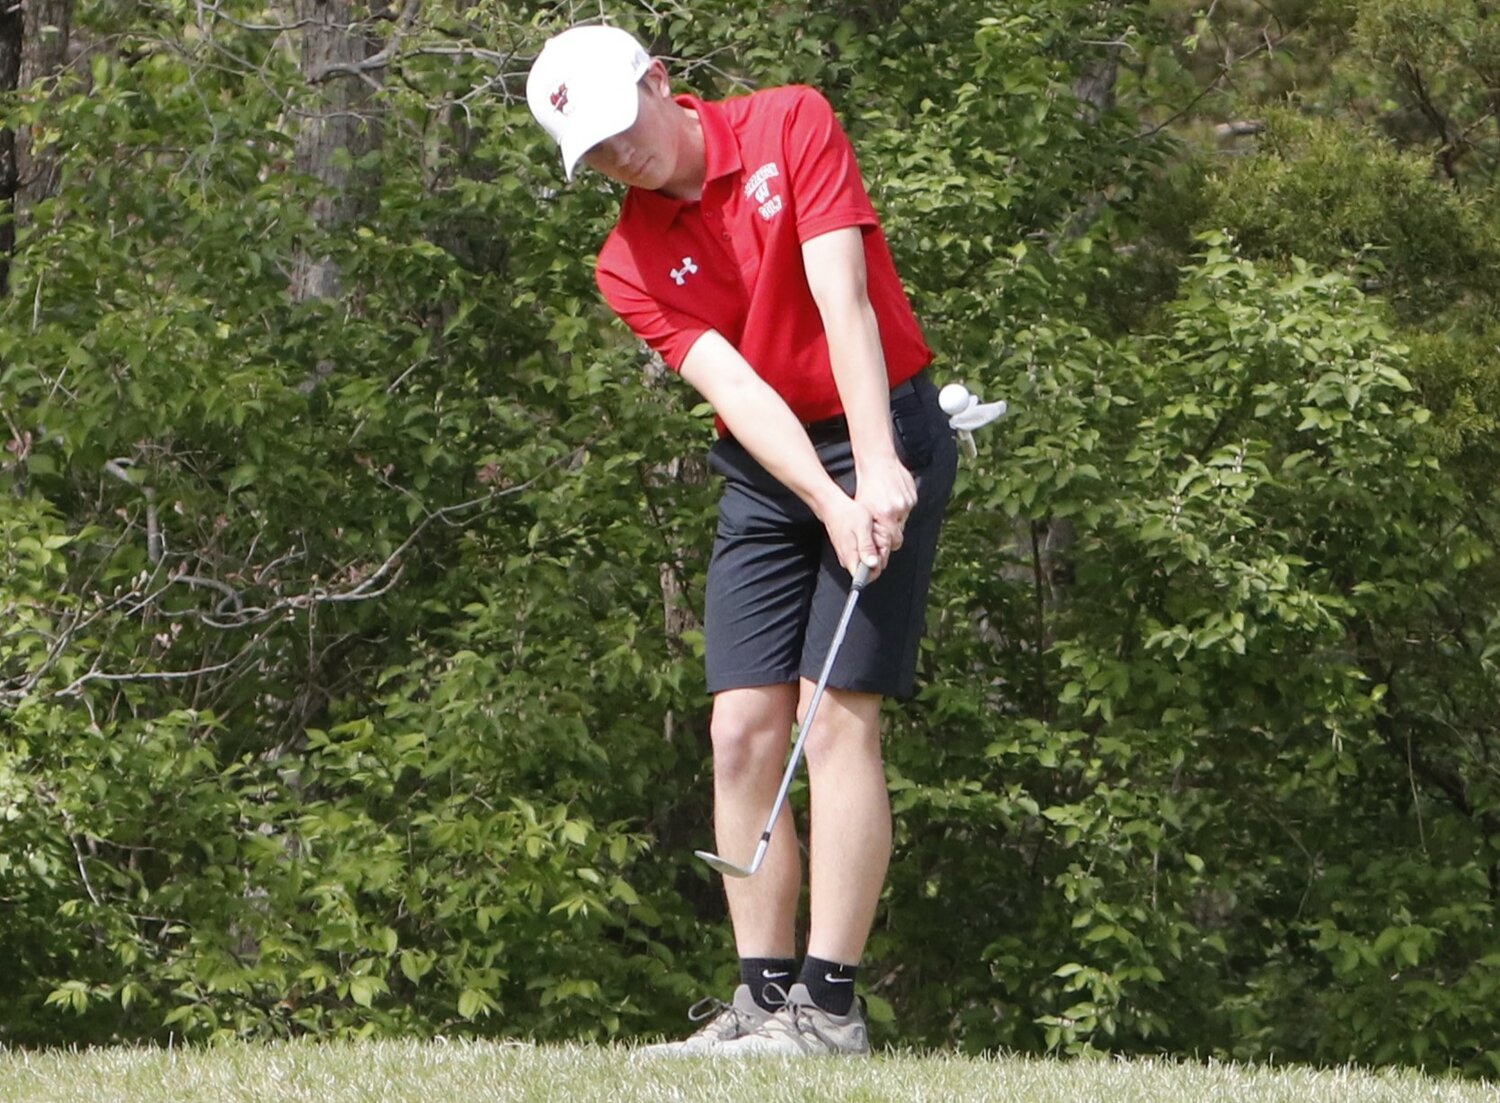 Warrenton junior Owen Thompson chips the ball onto the green at the No. 2 hole at Country Lake Golf Course.